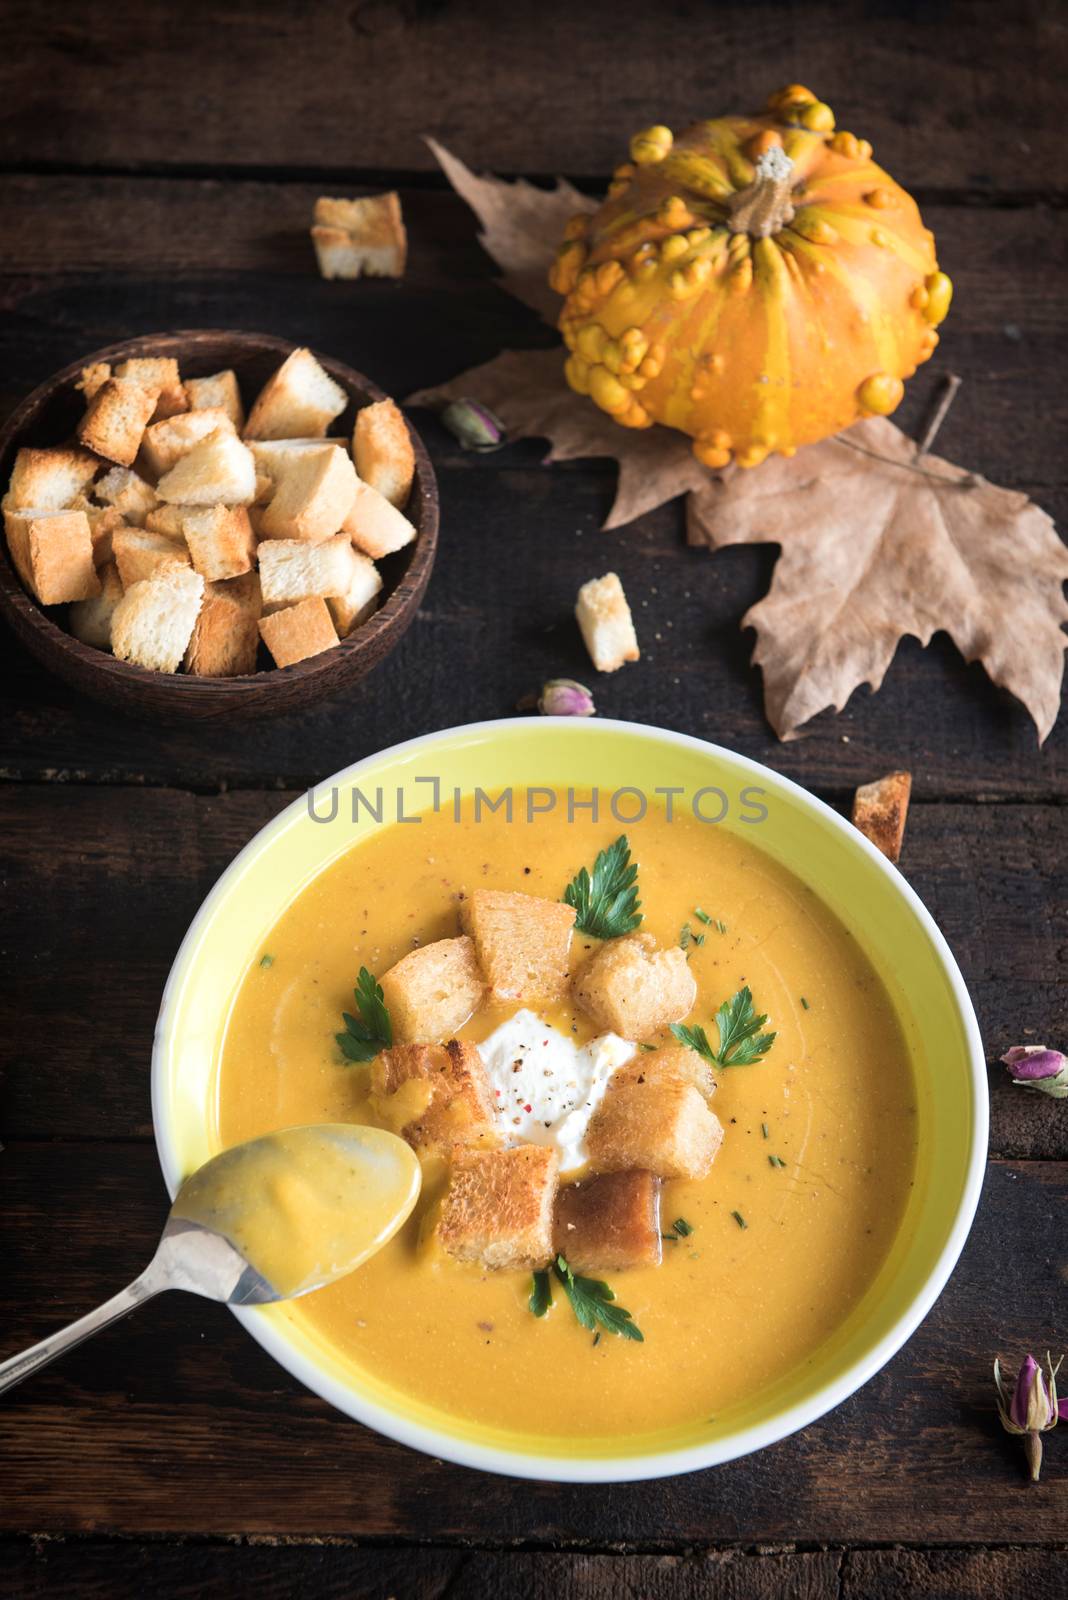 Pumpkin soup in the plate by badmanproduction